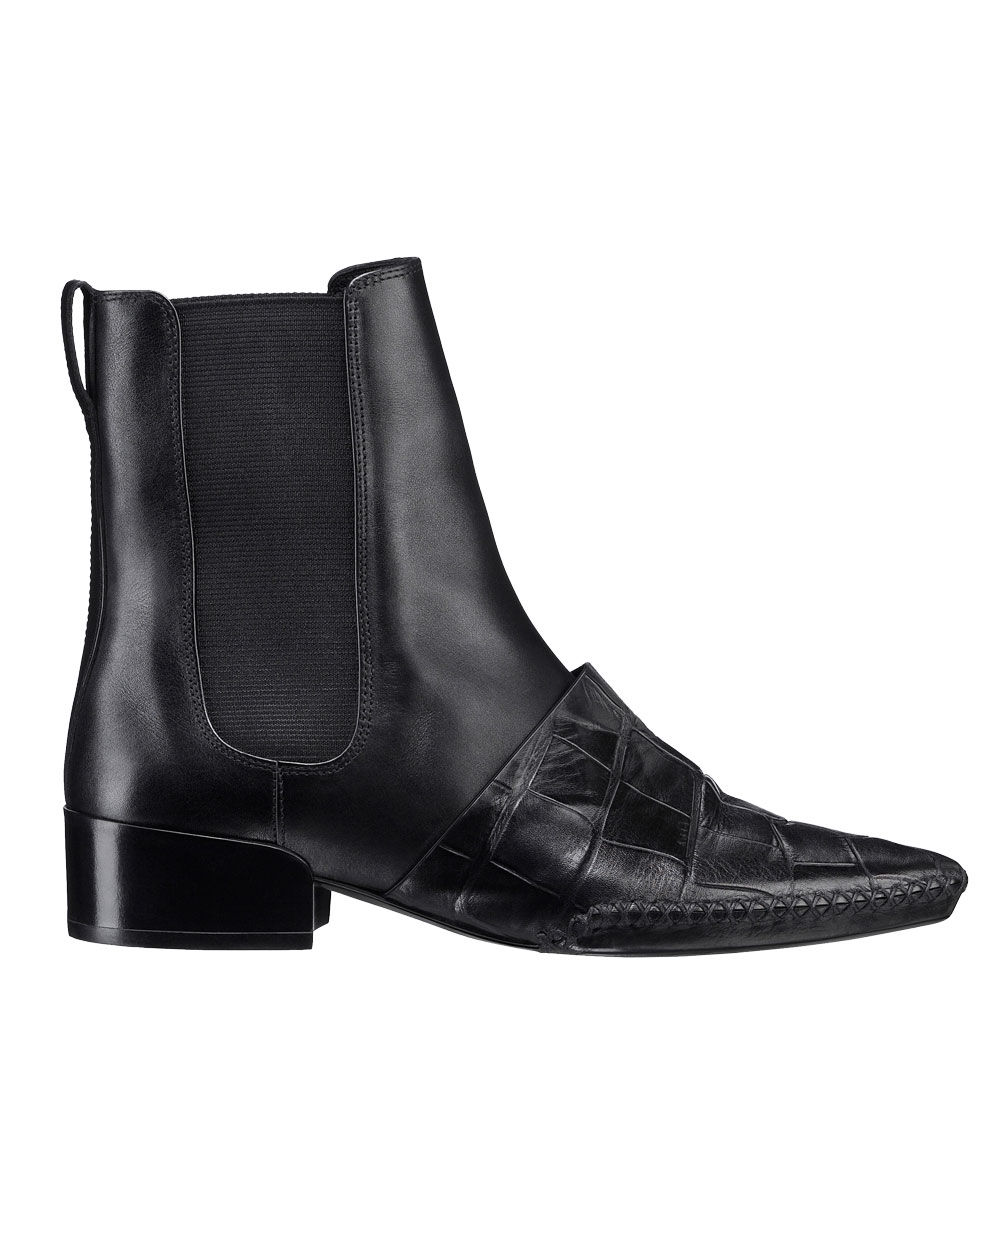 Christian Dior boots, $2150